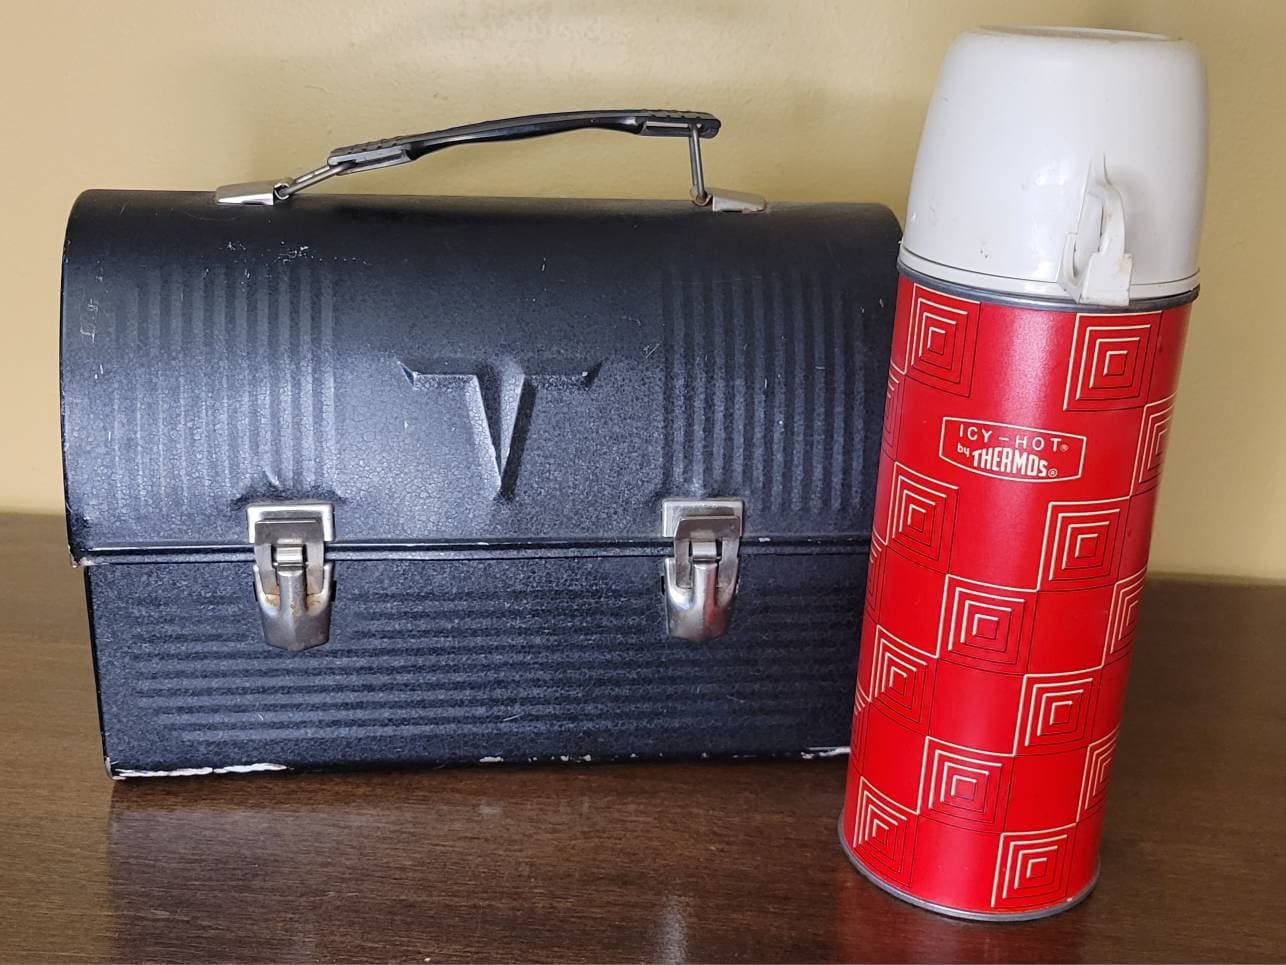 Vintage Lunch Box & Thermos, Icy Hot Thermos, Metal Lunchbox